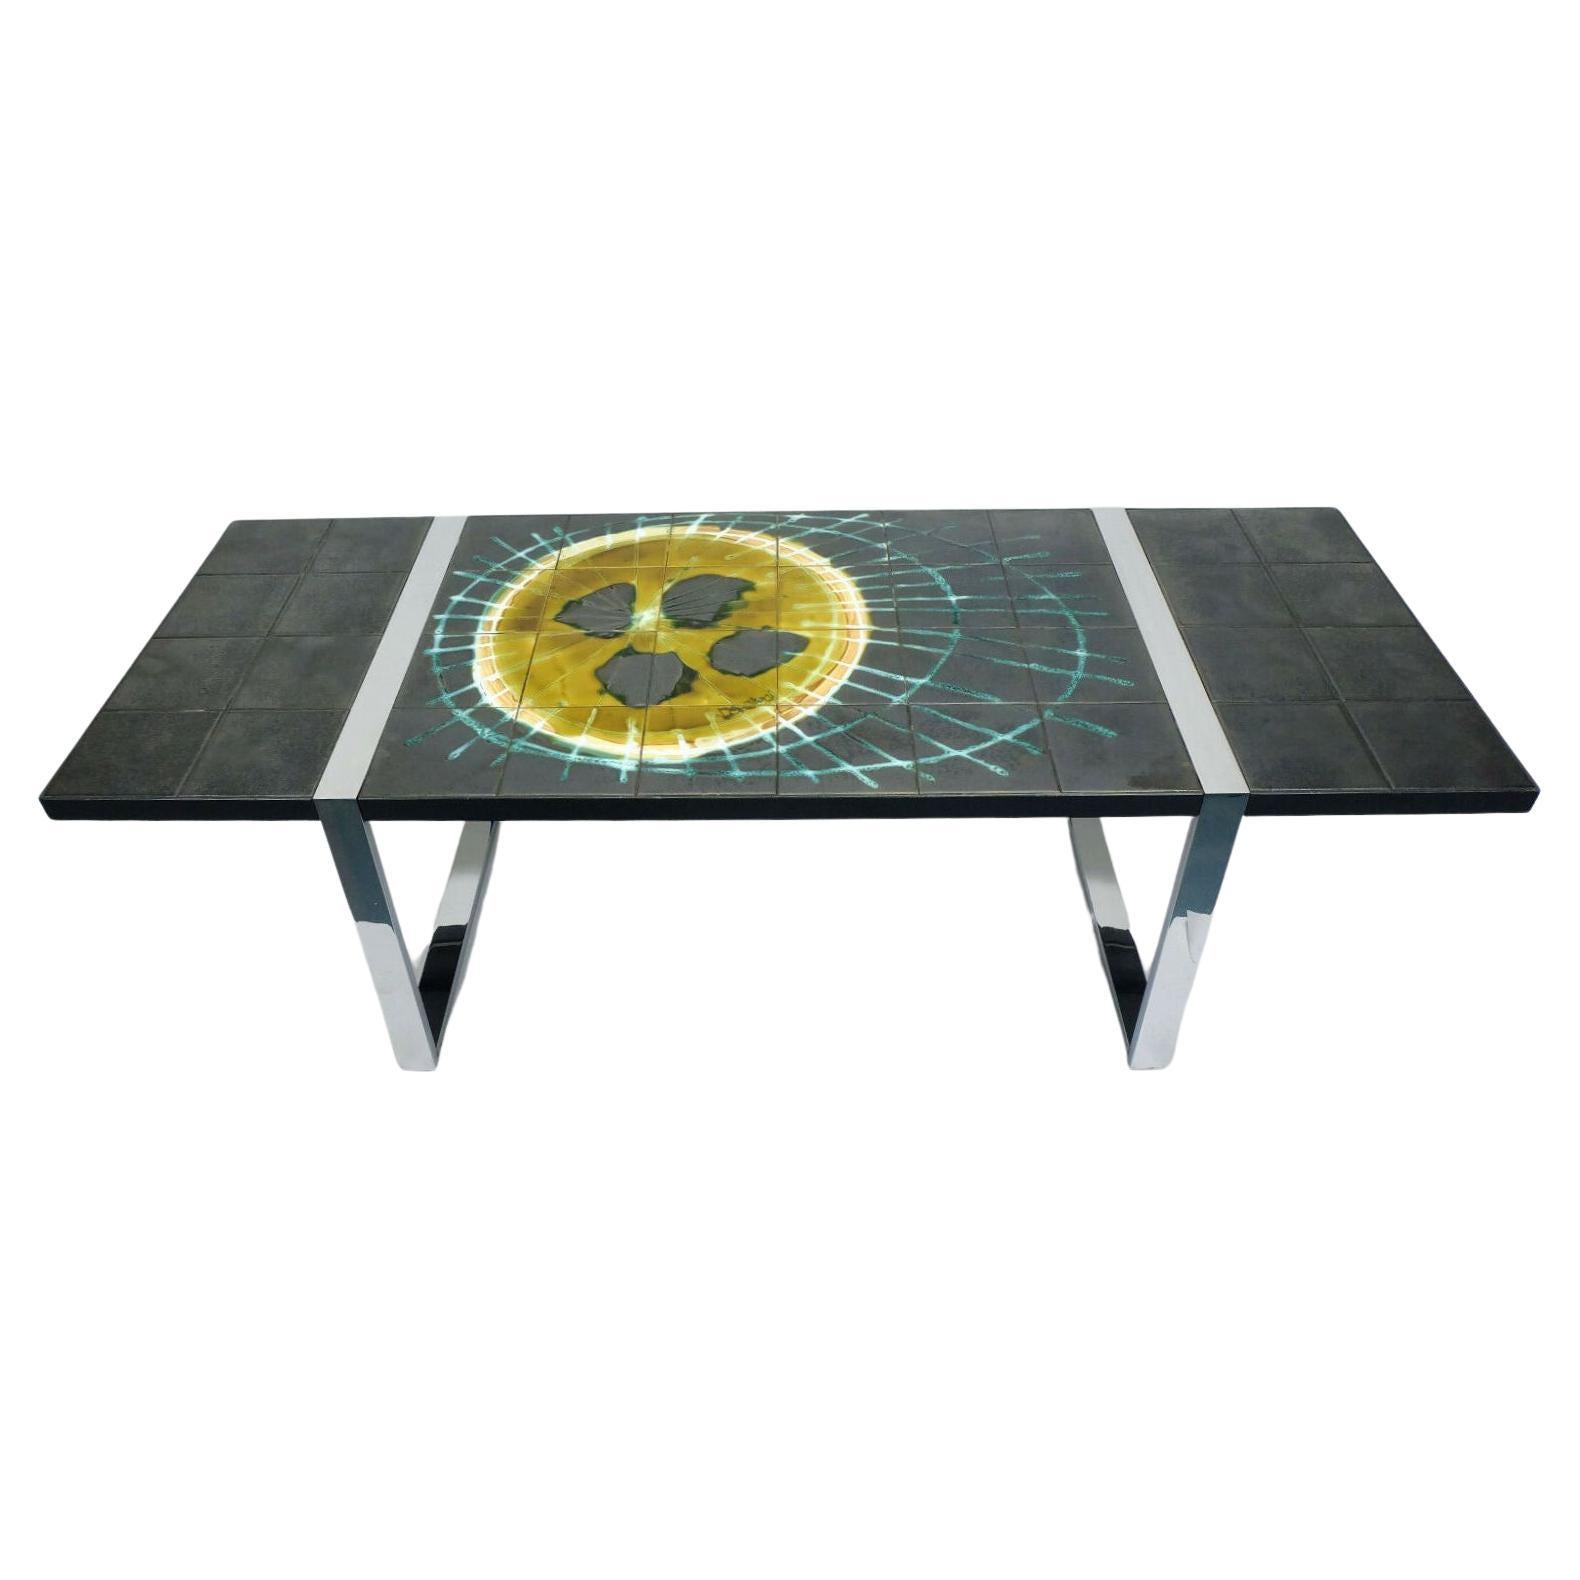 1960s Belarti Coffeetable with Ceramic Tile Top and Chrome Base